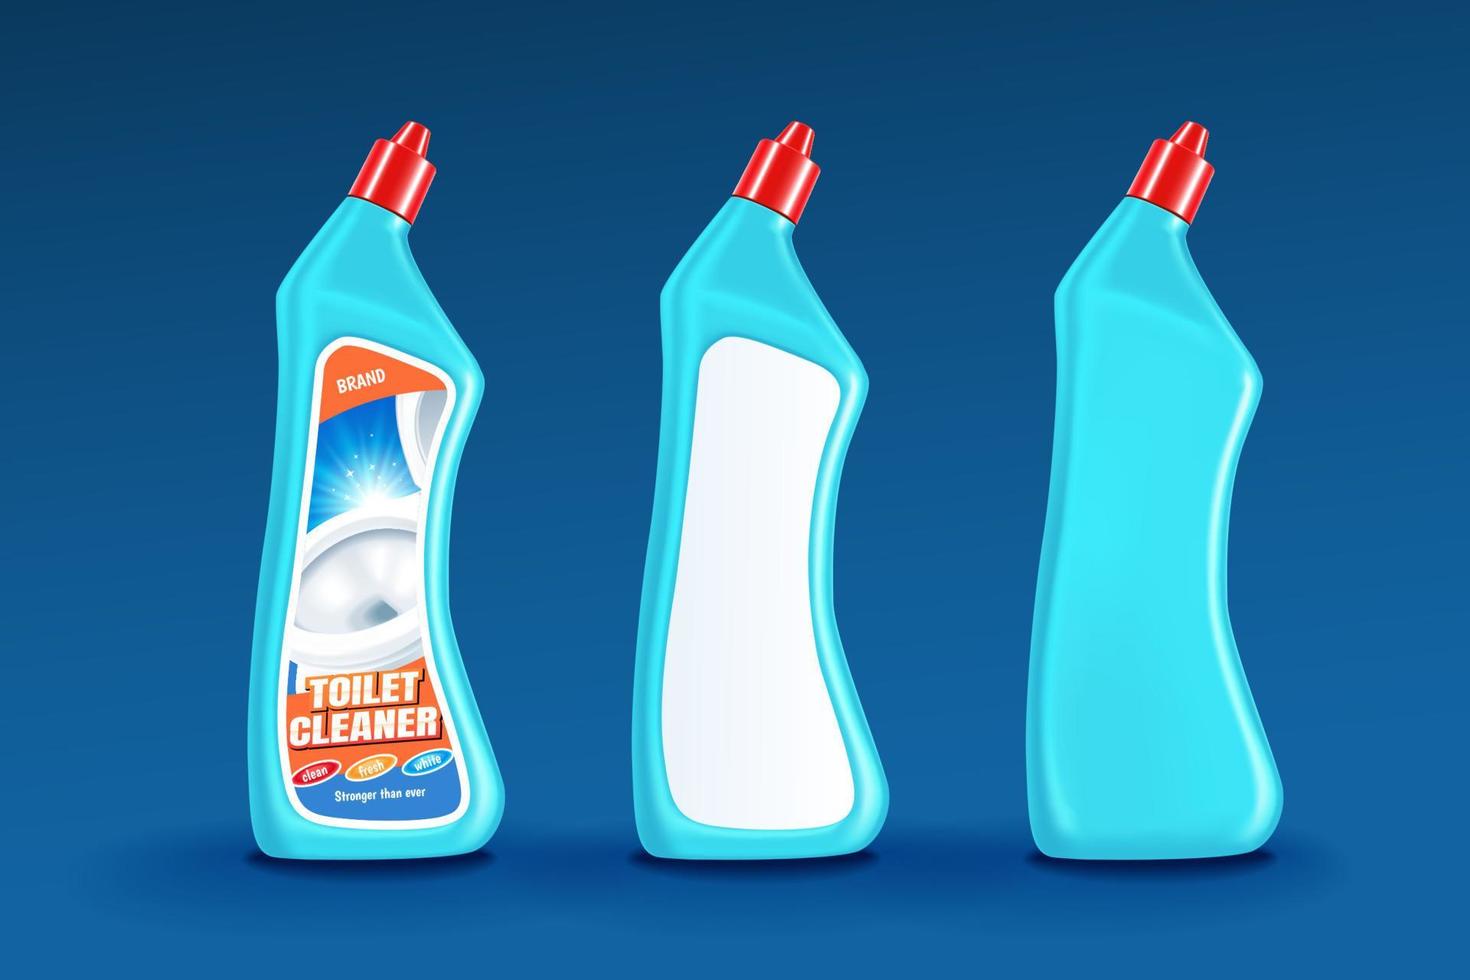 Toilet cleaner bottle mockup set on blue background in 3d illustration, one with blank label and one with designed sticker vector